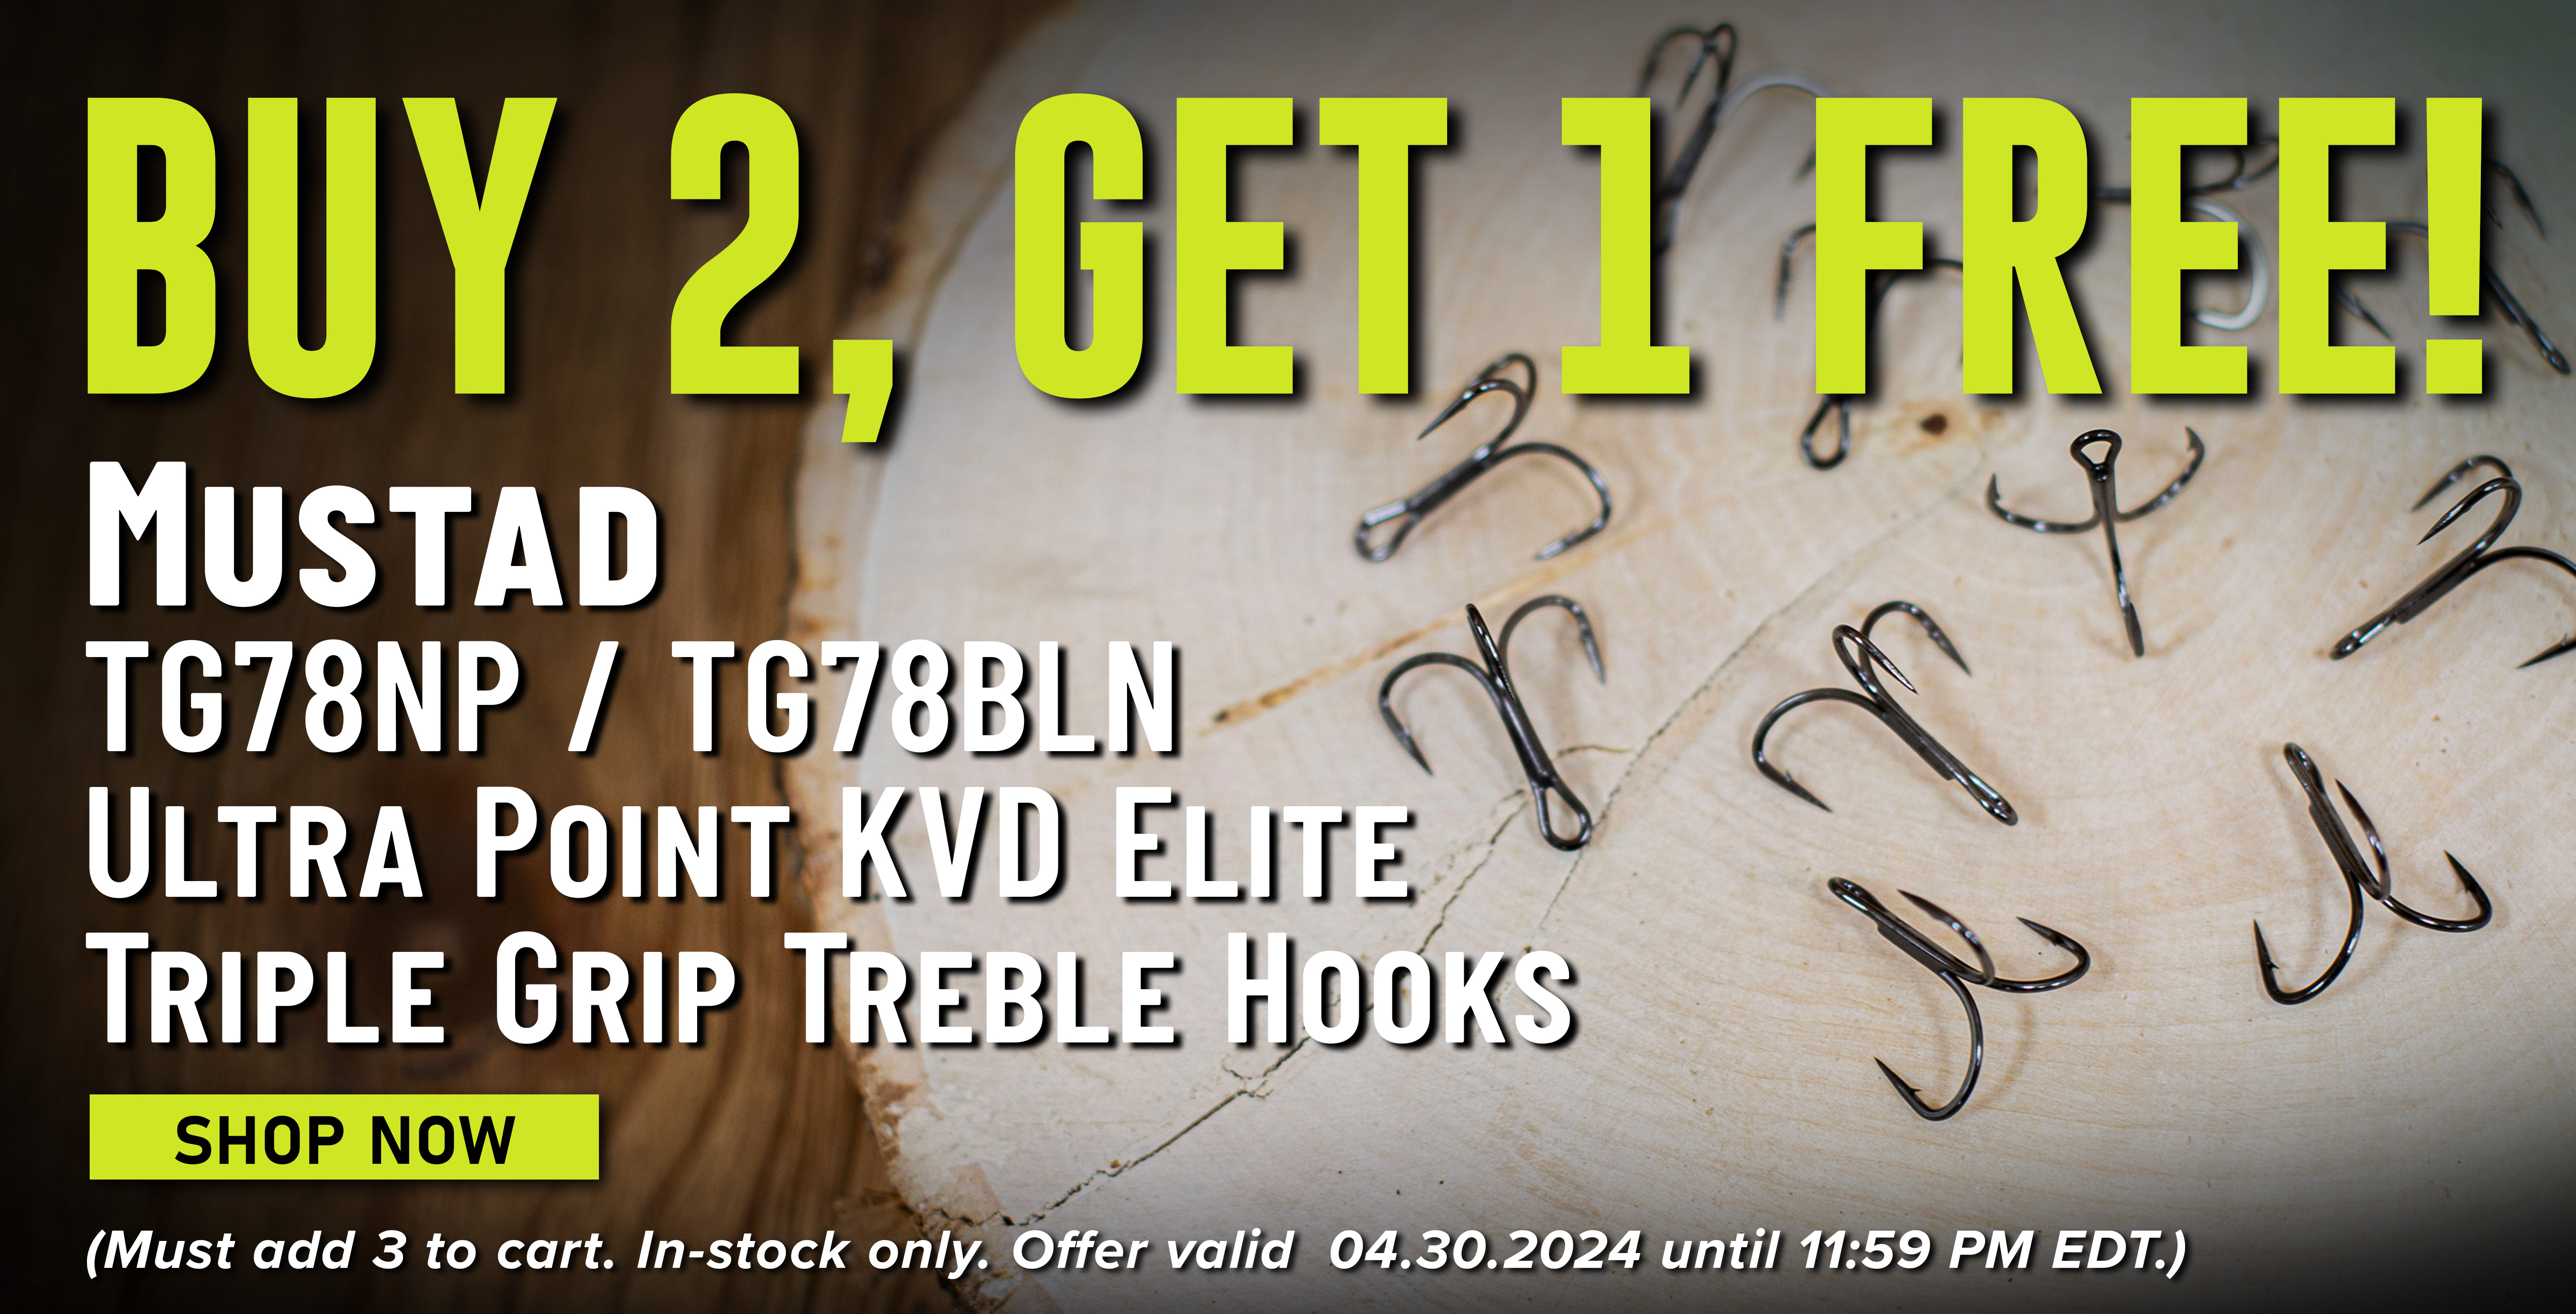 Buy 2, Get 1 Free! Mustad TG78NP / TG78BLN Ultra Point KVD Elite Triple Grip Treble Hooks Shop Now (Must add 3 to cart. In-stock only. Offer valid 04.30.2024 until 11:59 PM EDT.)